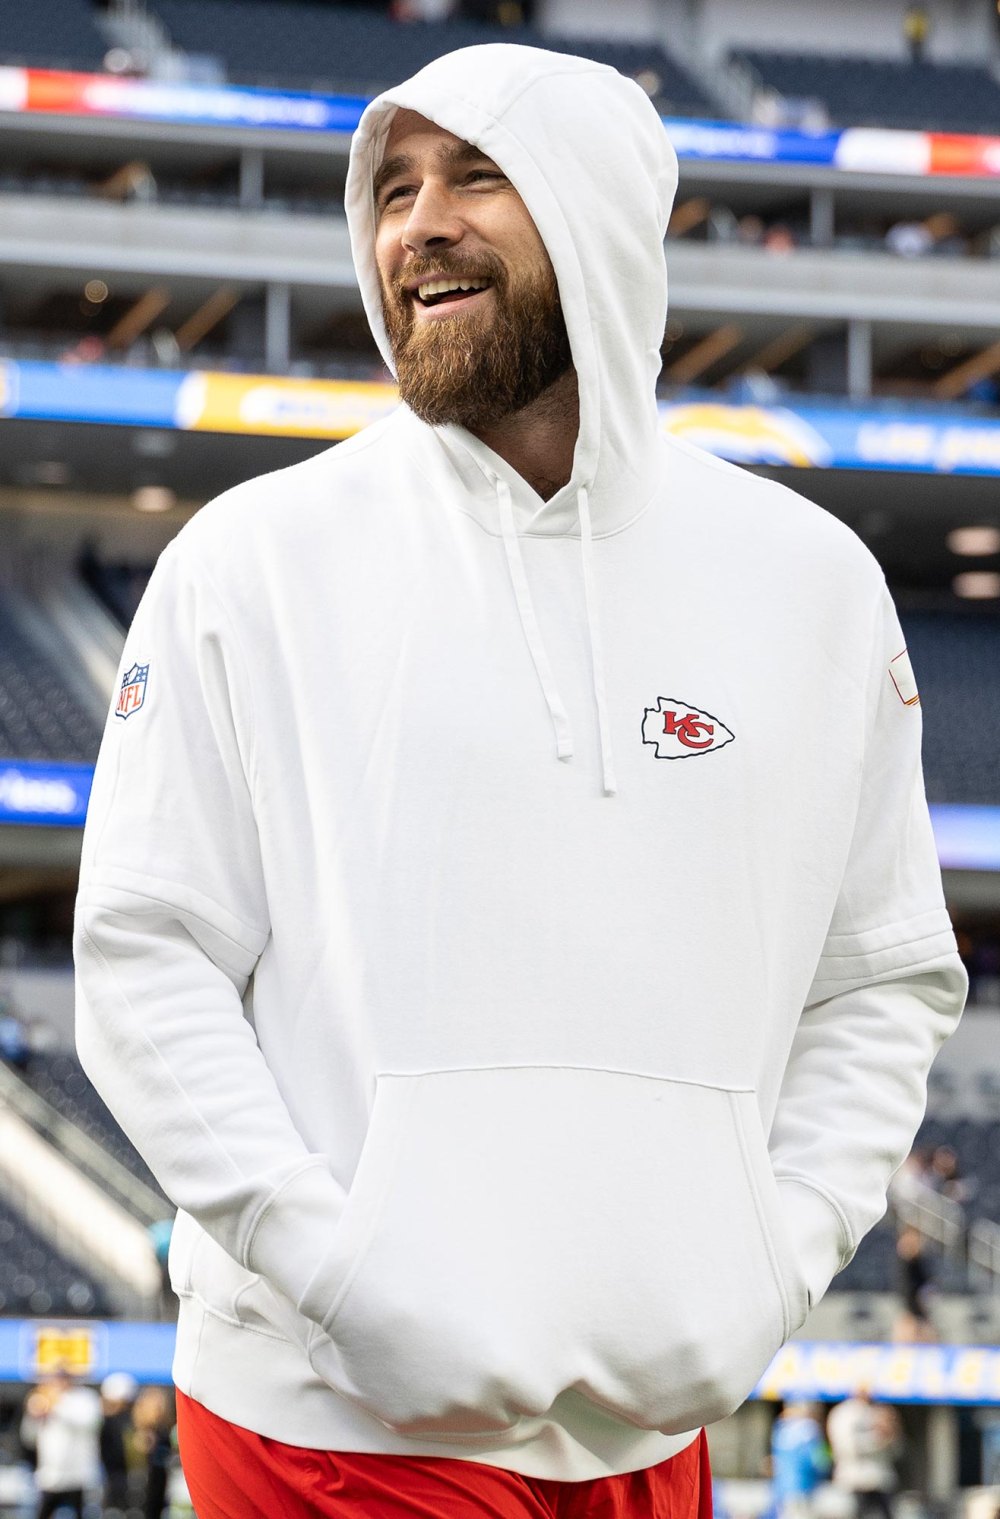 Cheesecake Factory Calls Travis Kelce a ‘Fashion Icon’ After He Dressed Like Their Menu